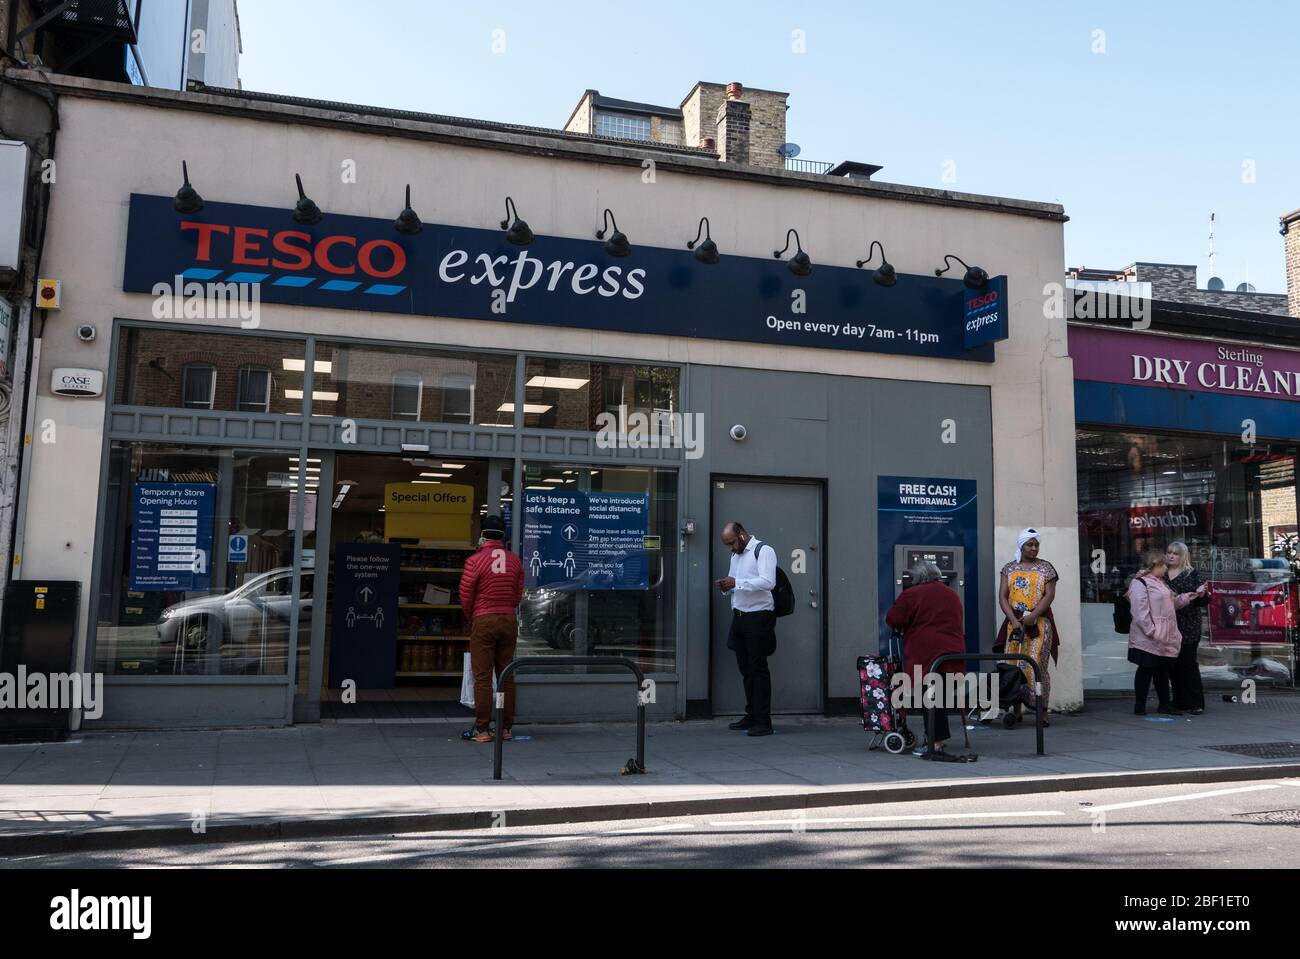 Wednesday April 15th 2020, lockdown from Corona Virus pandemic still in act. Picturing advert warning re Corona Virus restrictions around London . Part of various  location : Vauxhall, Wandsworth,  Battersea, Camden Town. Pictured : queue at Tesco express on Tower bridge road, London Stock Photo